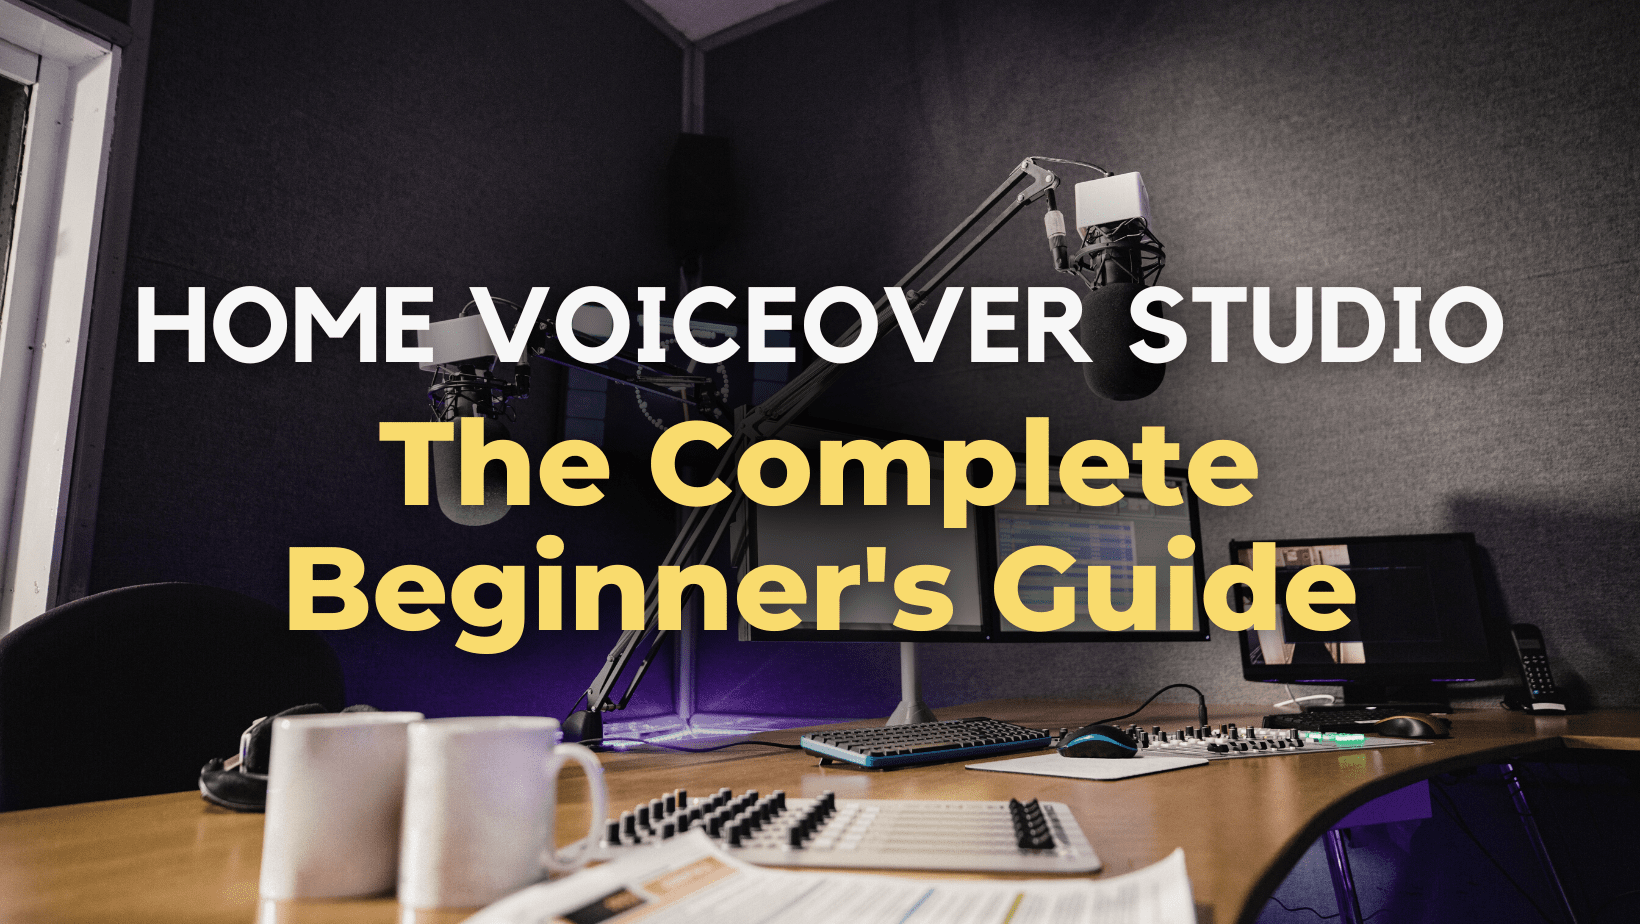 Featured image for “Home Voiceover Studio: The Complete Beginner’s Guide”